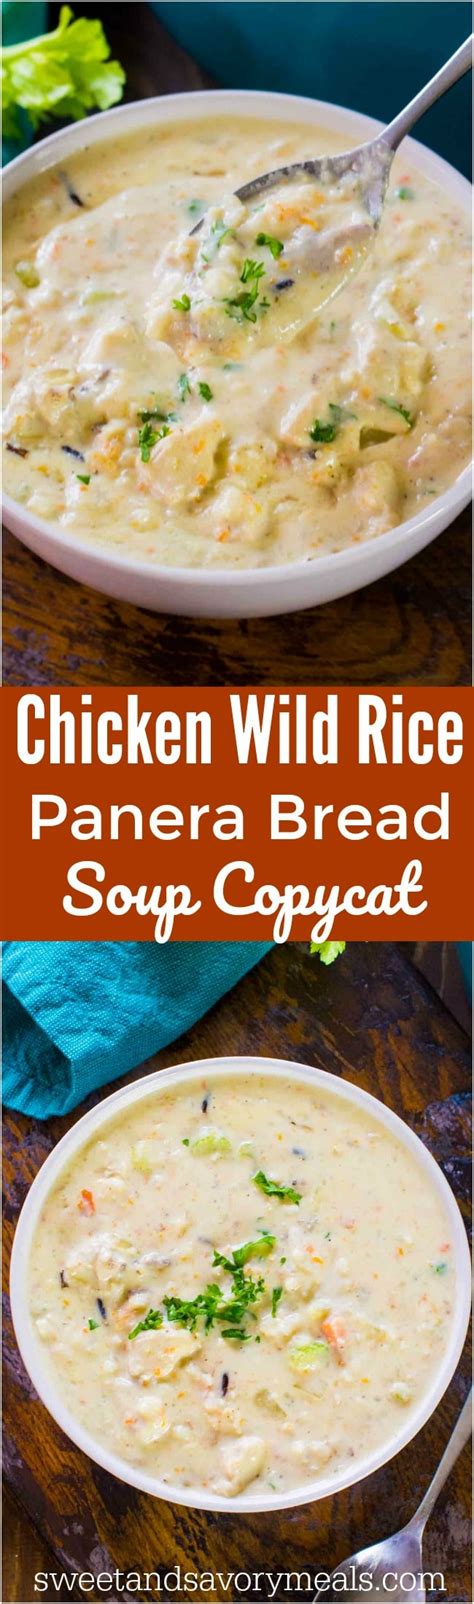 Be sure to let me know how it. Panera Bread Chicken Wild Rice Soup - Copycat - Sweet and ...